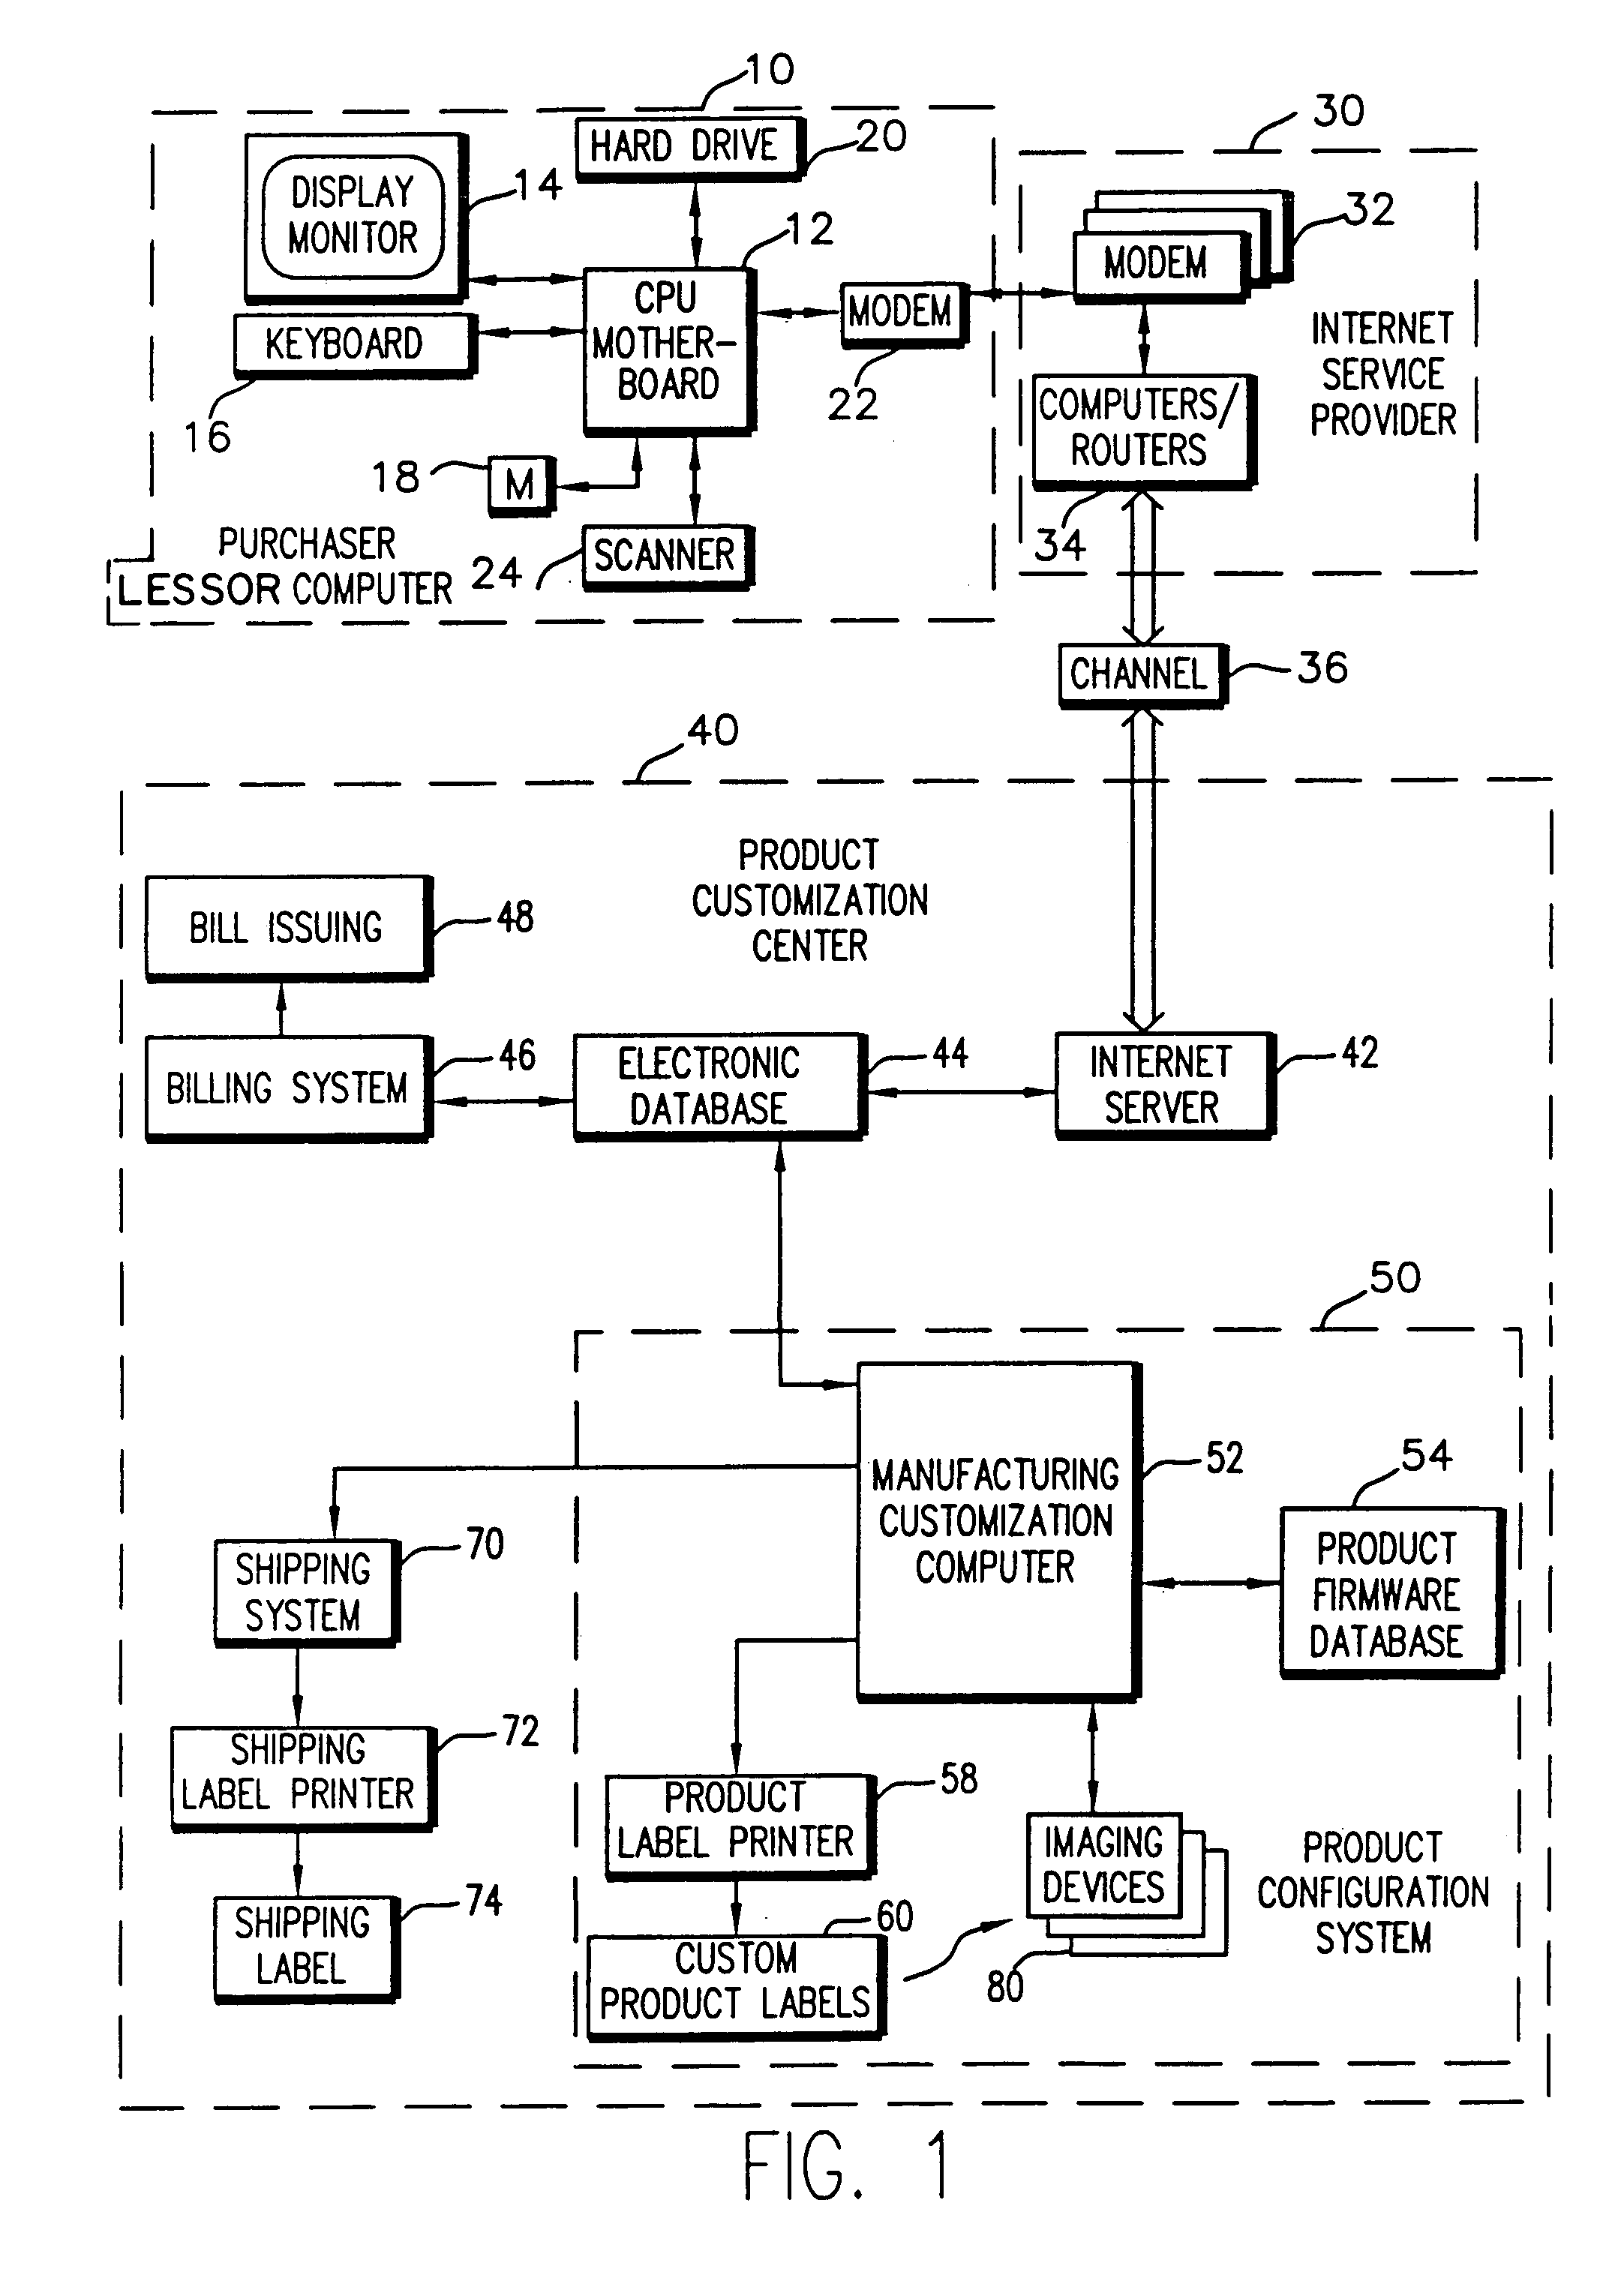 System and method for providing image products and/or services